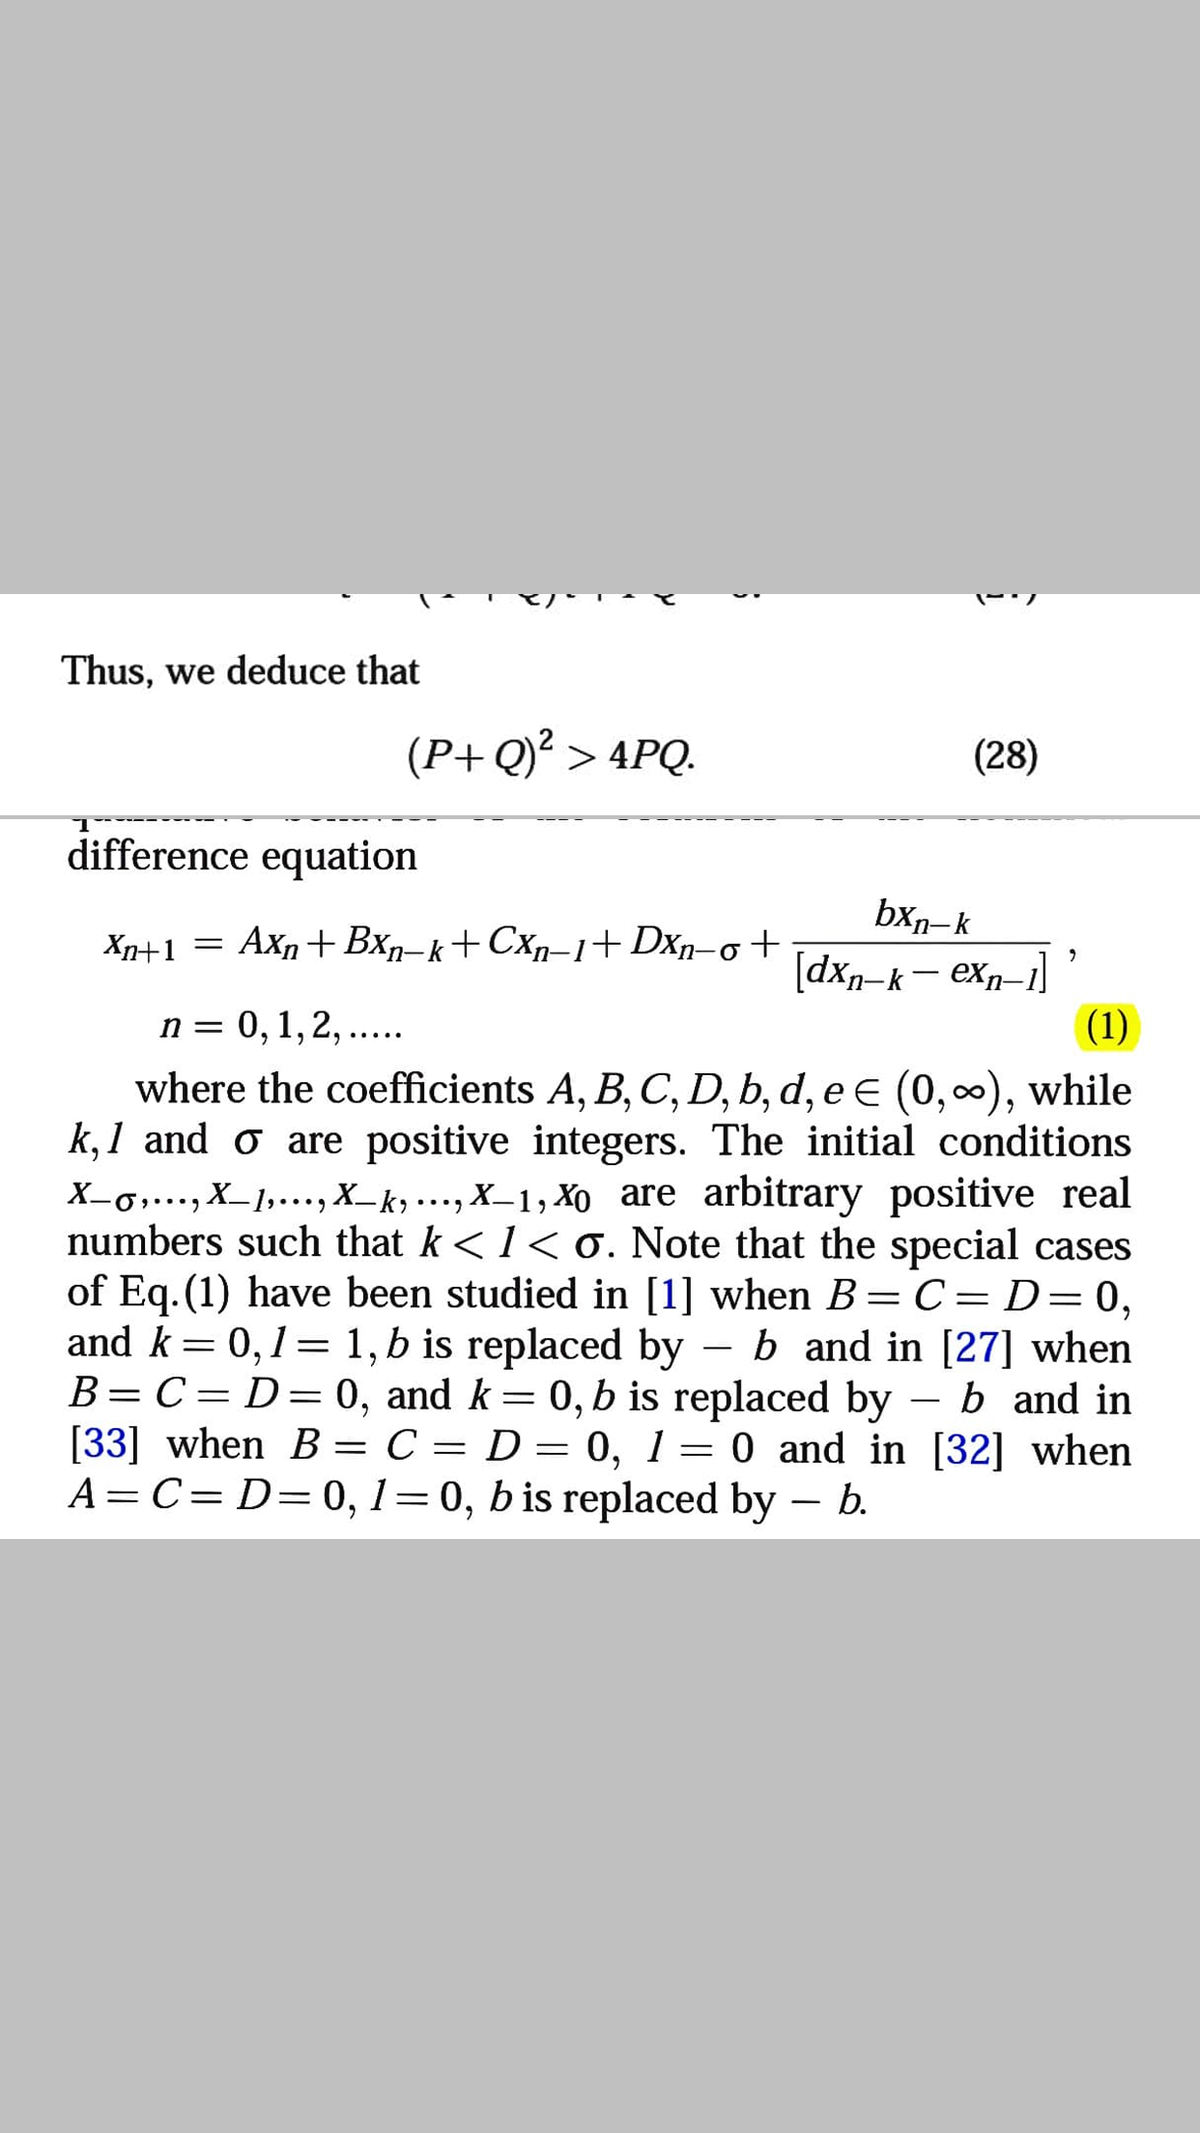 Thus, we deduce that
(P+ Q)² > 4PQ.
(28)
difference equation
bxn-k
Xn+1 = Axn+ Bxn-k+Cxr-1+Dxn-o+
[dxn-k- exp-1]
(1)
n = 0, 1,2, ...
where the coefficients A, B, C, D, b, d, e E (0,), while
k,1 and o are positive integers. The initial conditions
X-o,..., X_1,..., X_k, ….., X_1, Xo are arbitrary positive real
numbers such that k<1< 0. Note that the special cases
of Eq.(1) have been studied in [1] when B=C= D=0,
and k= 0,1= 1, b is replaced by
B=C=D=0, and k= 0, b is replaced by – b and in
[33] when B = C = D = 0, 1 = 0 and in [32] when
A= C= D=0, 1=0, b is replaced by – b.
••.)
– b and in [27] when
6.
